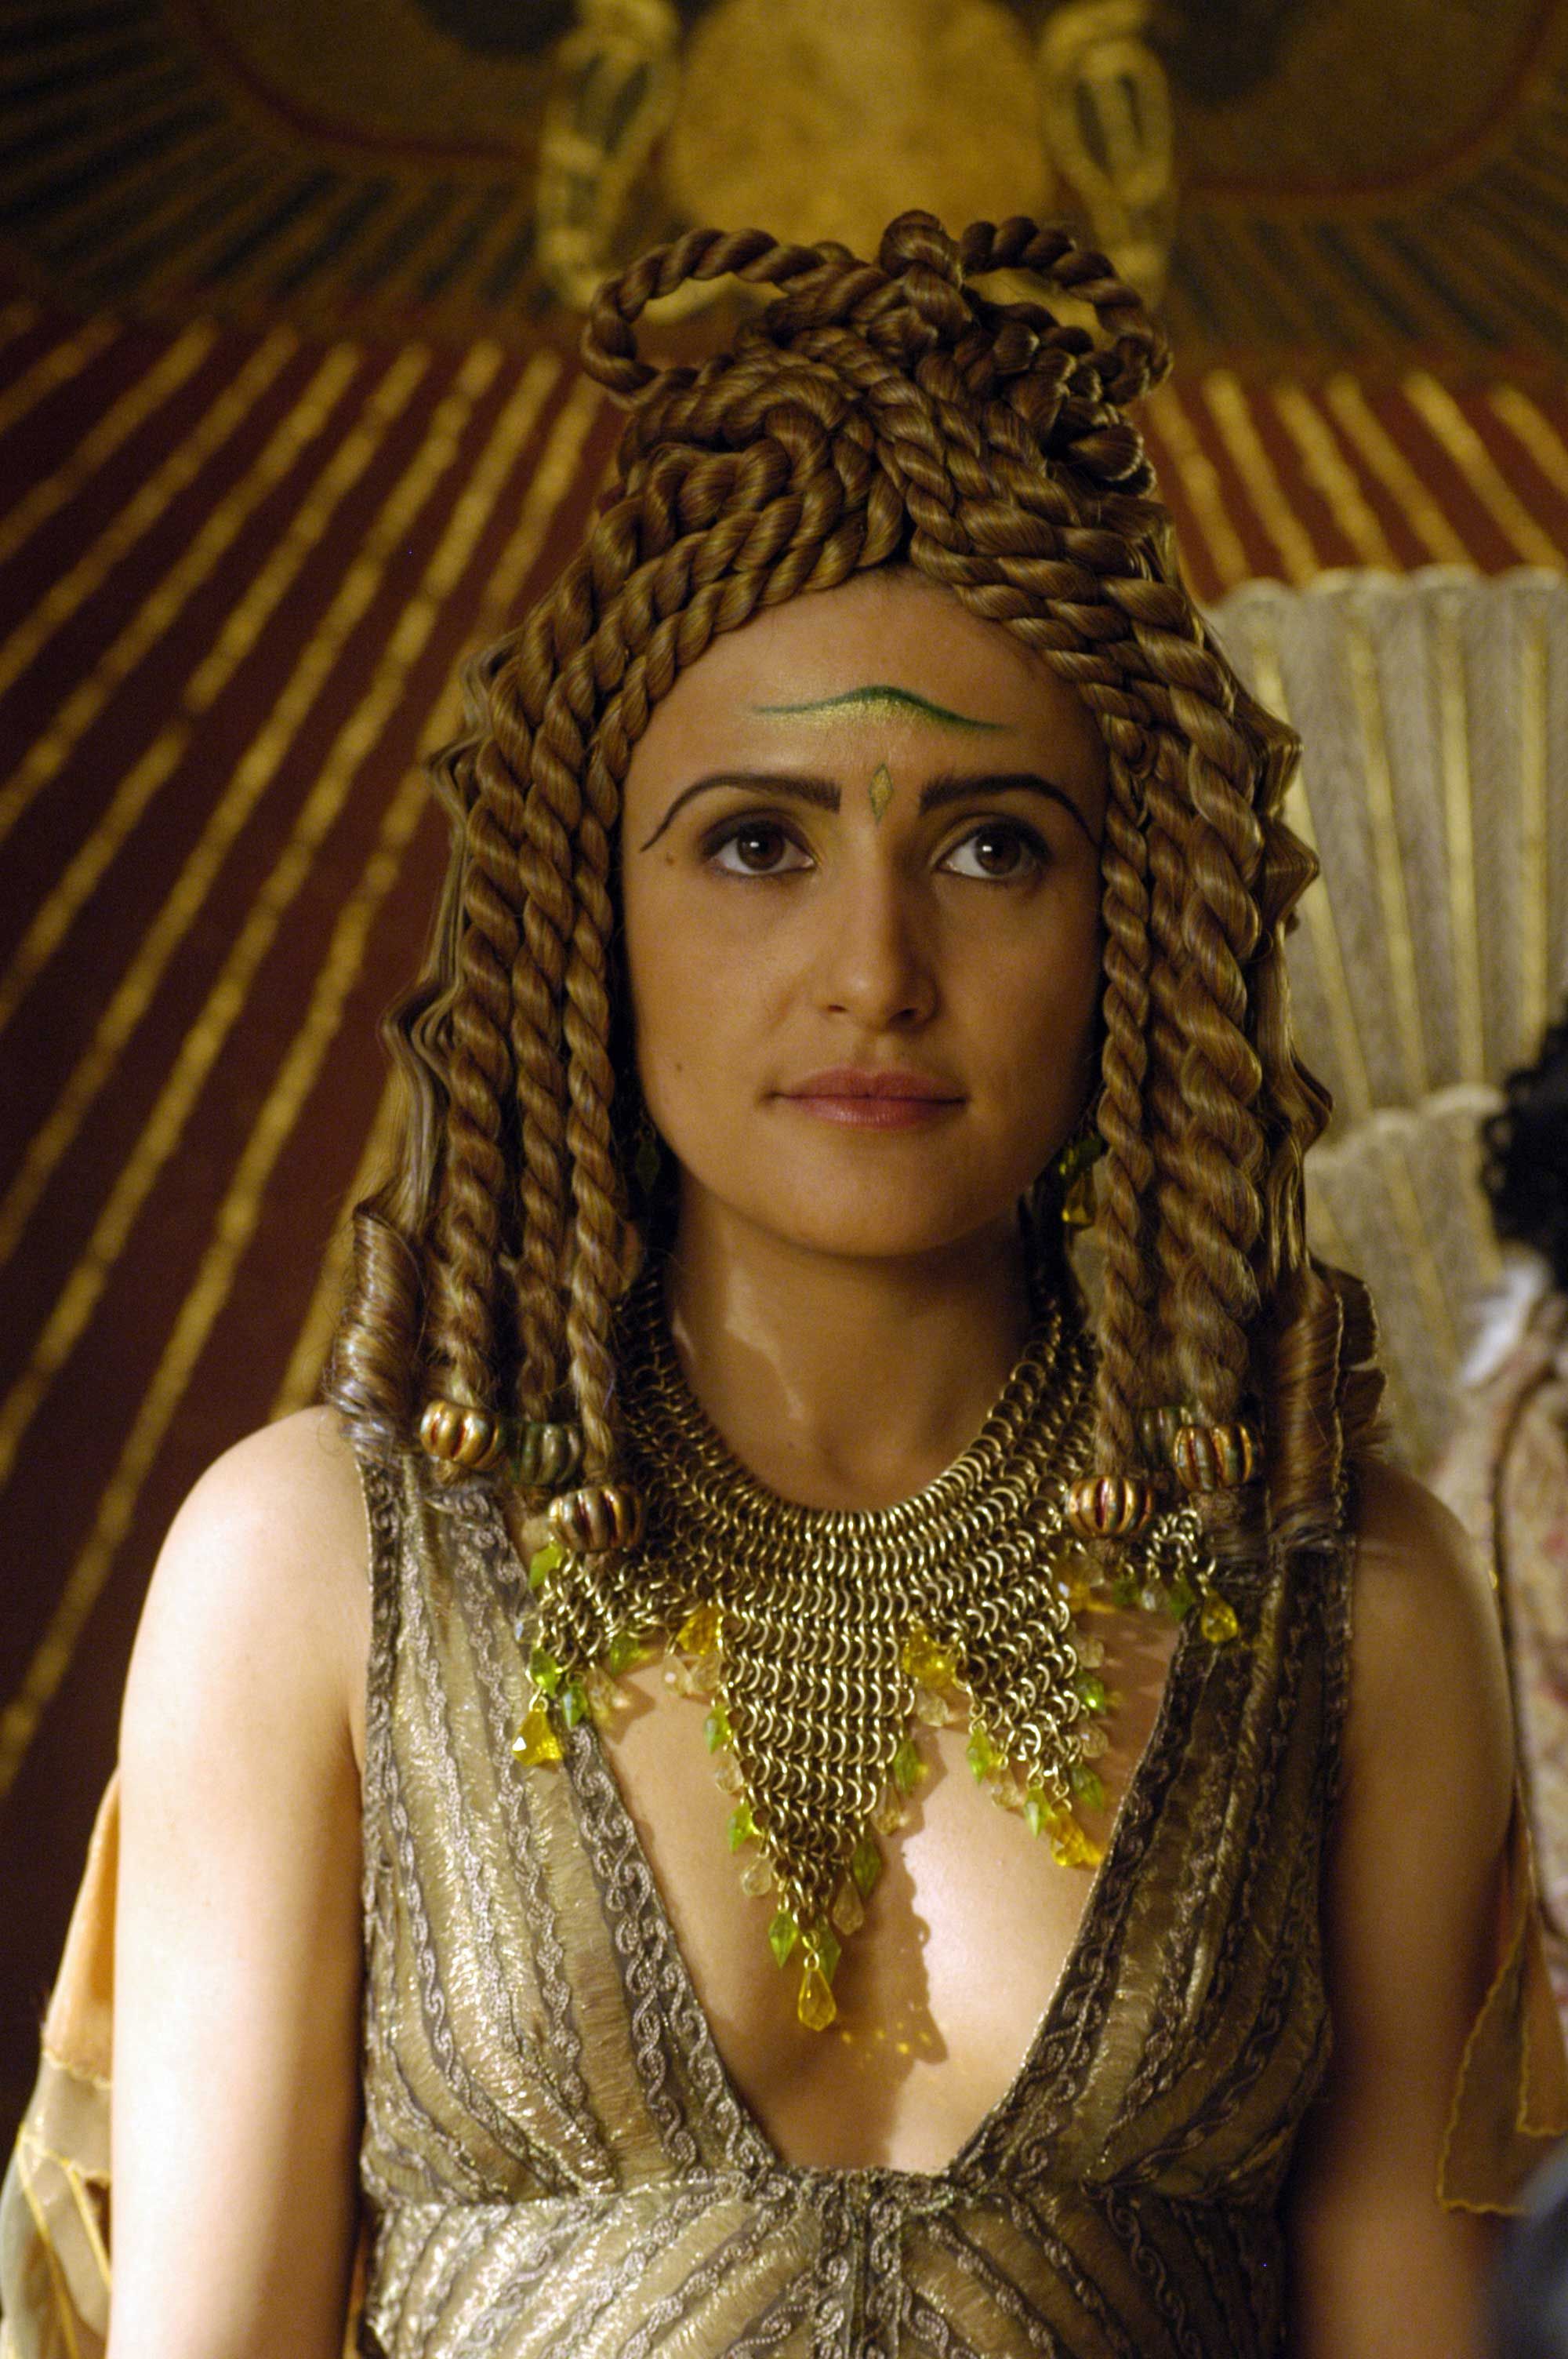 Lyndsey Marshal as Cleopatra in the HBO series “Rome,” 2005-2007.